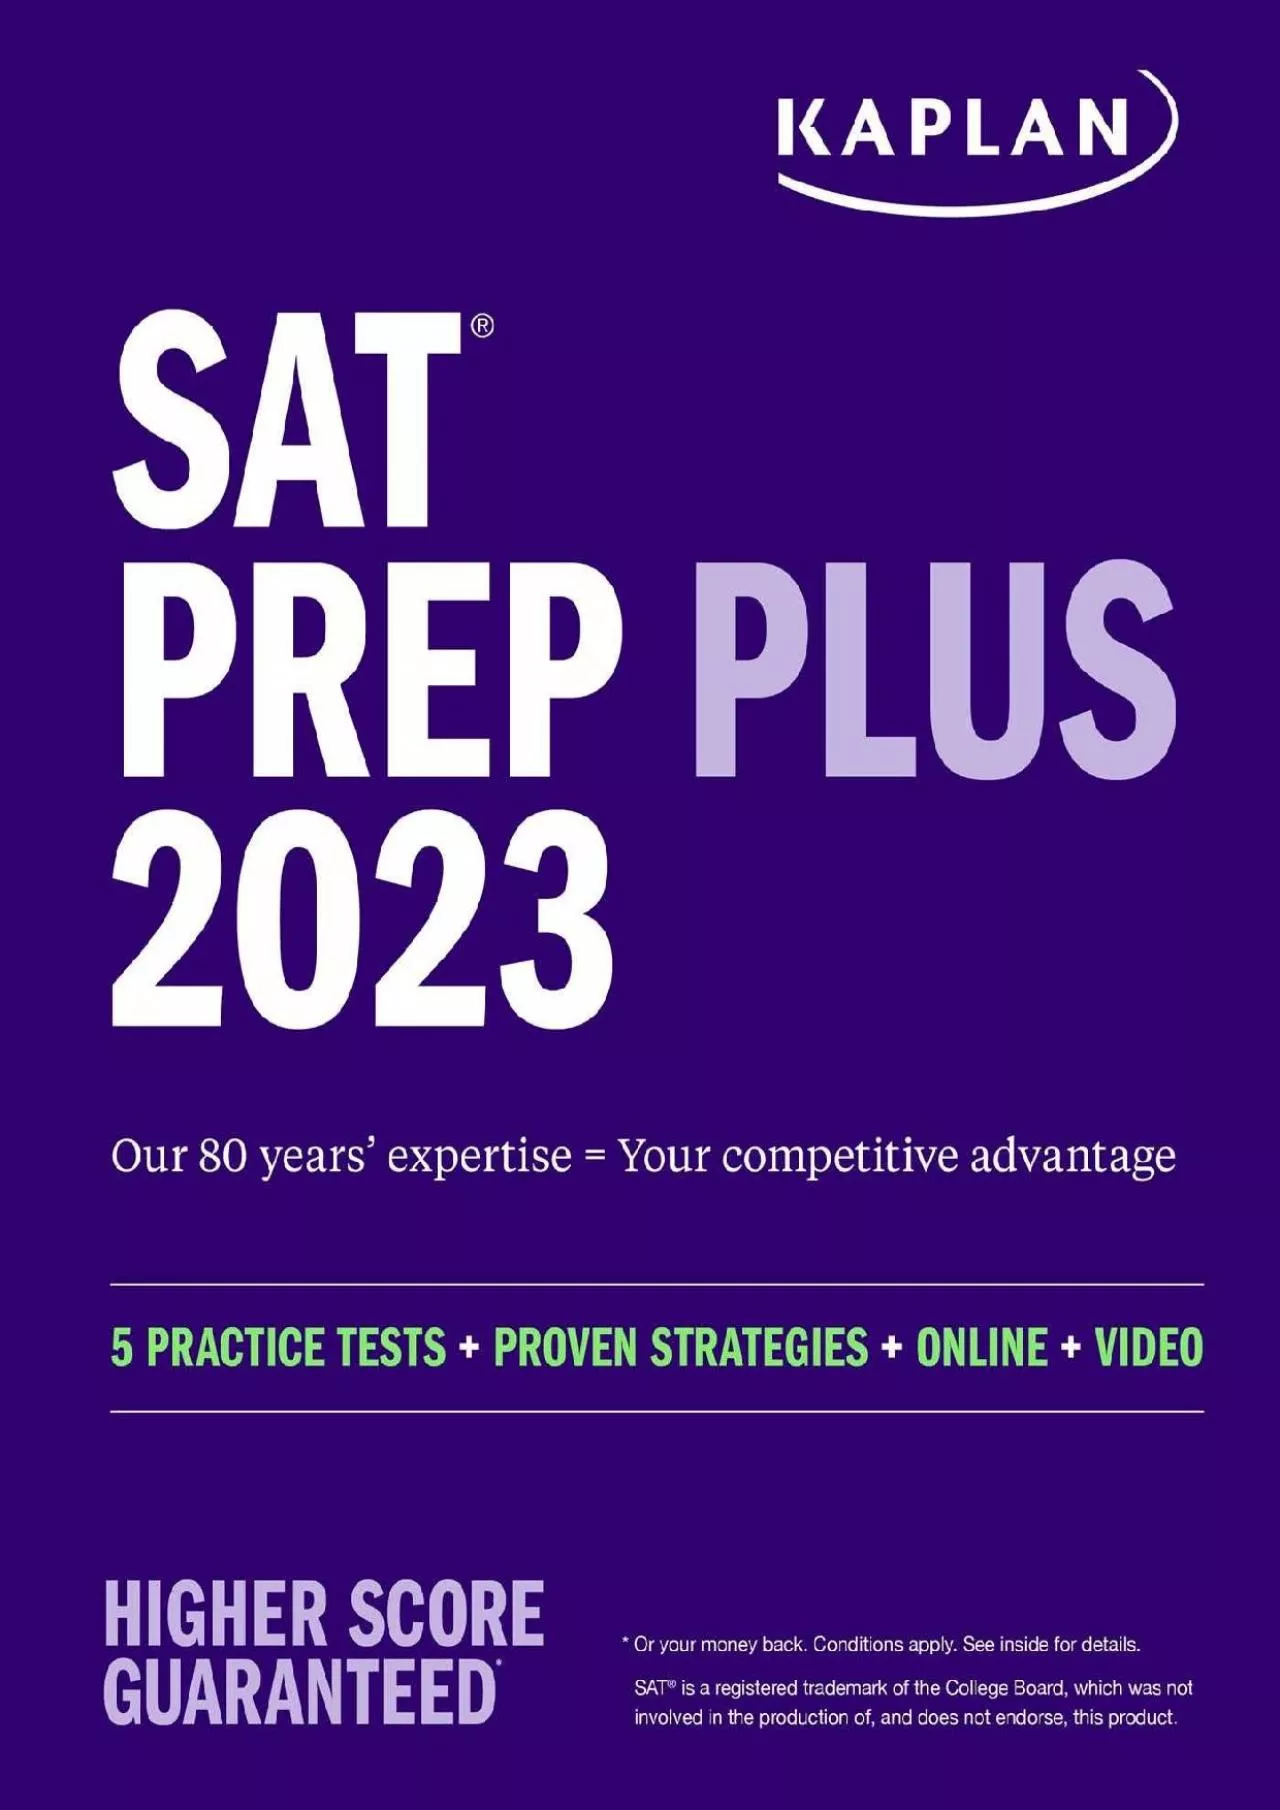 [DOWNLOAD] SAT Prep Plus 2023: Includes 5 Full Length Practice Tests2 in the book and